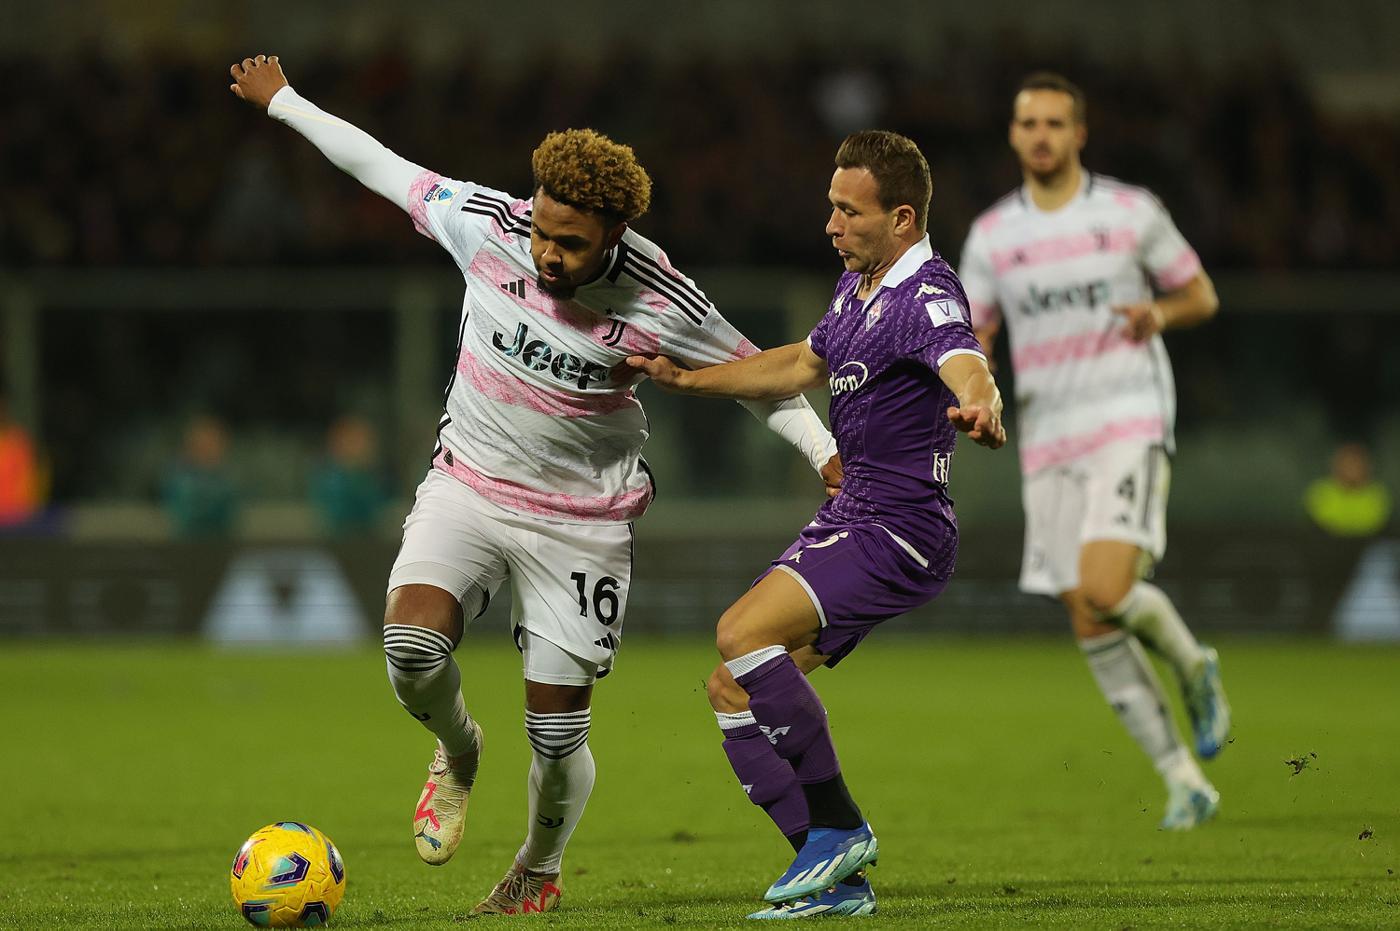 Goals and Highlights Fiorentina 0-1 Juventus in Serie A